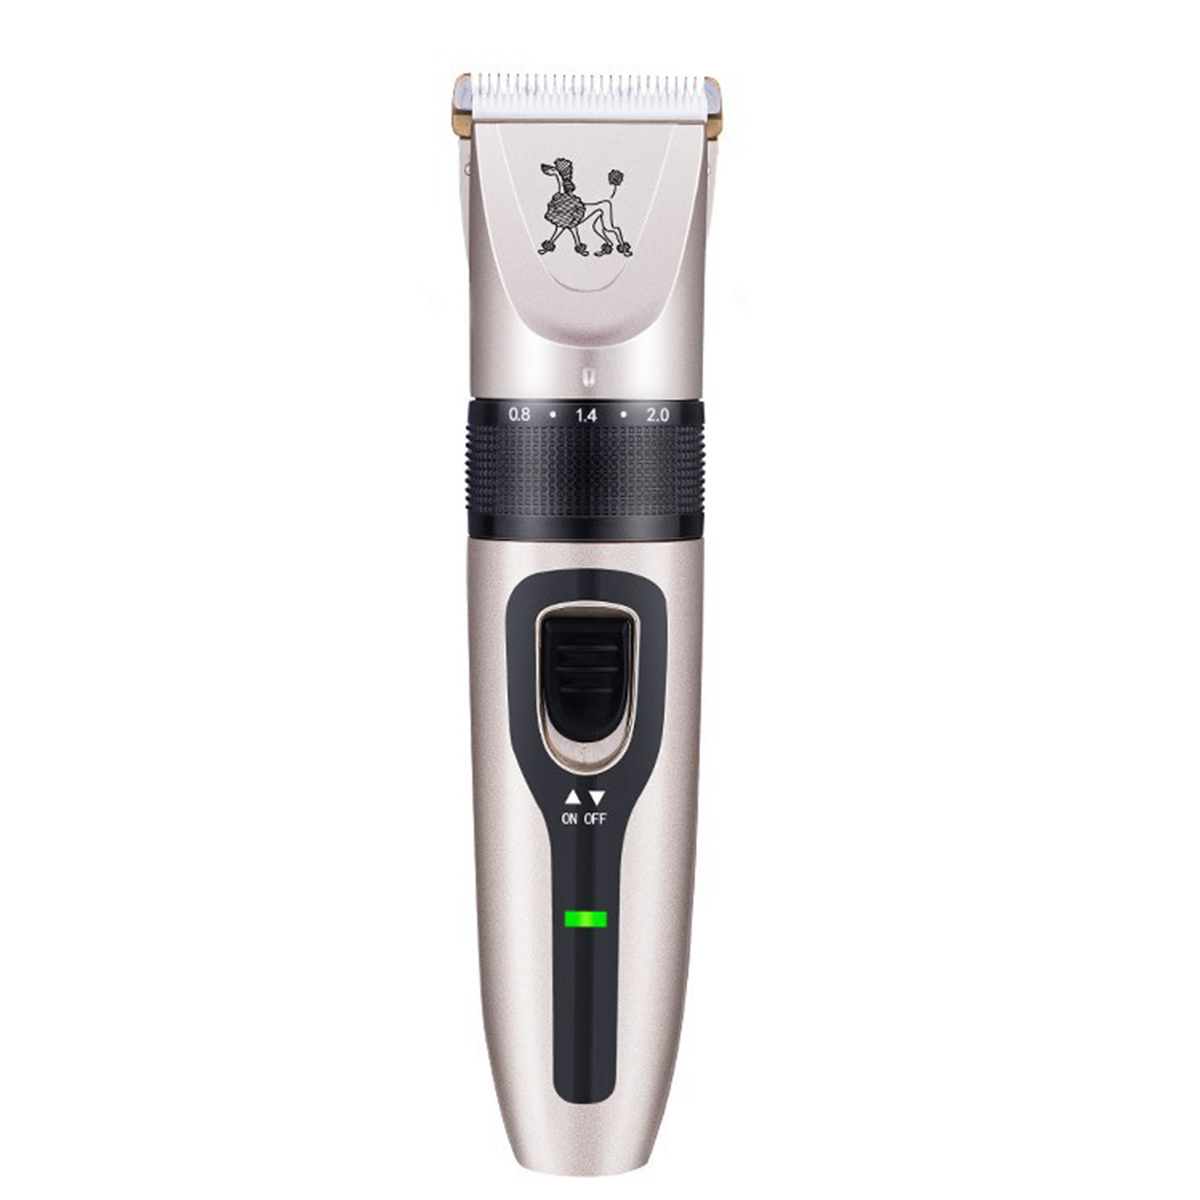 5 Gears USB Rechargeable Pet Electric Hair Shaver Razor Dog Cat Animal Hair Trimmer Clipper Grooming Machine